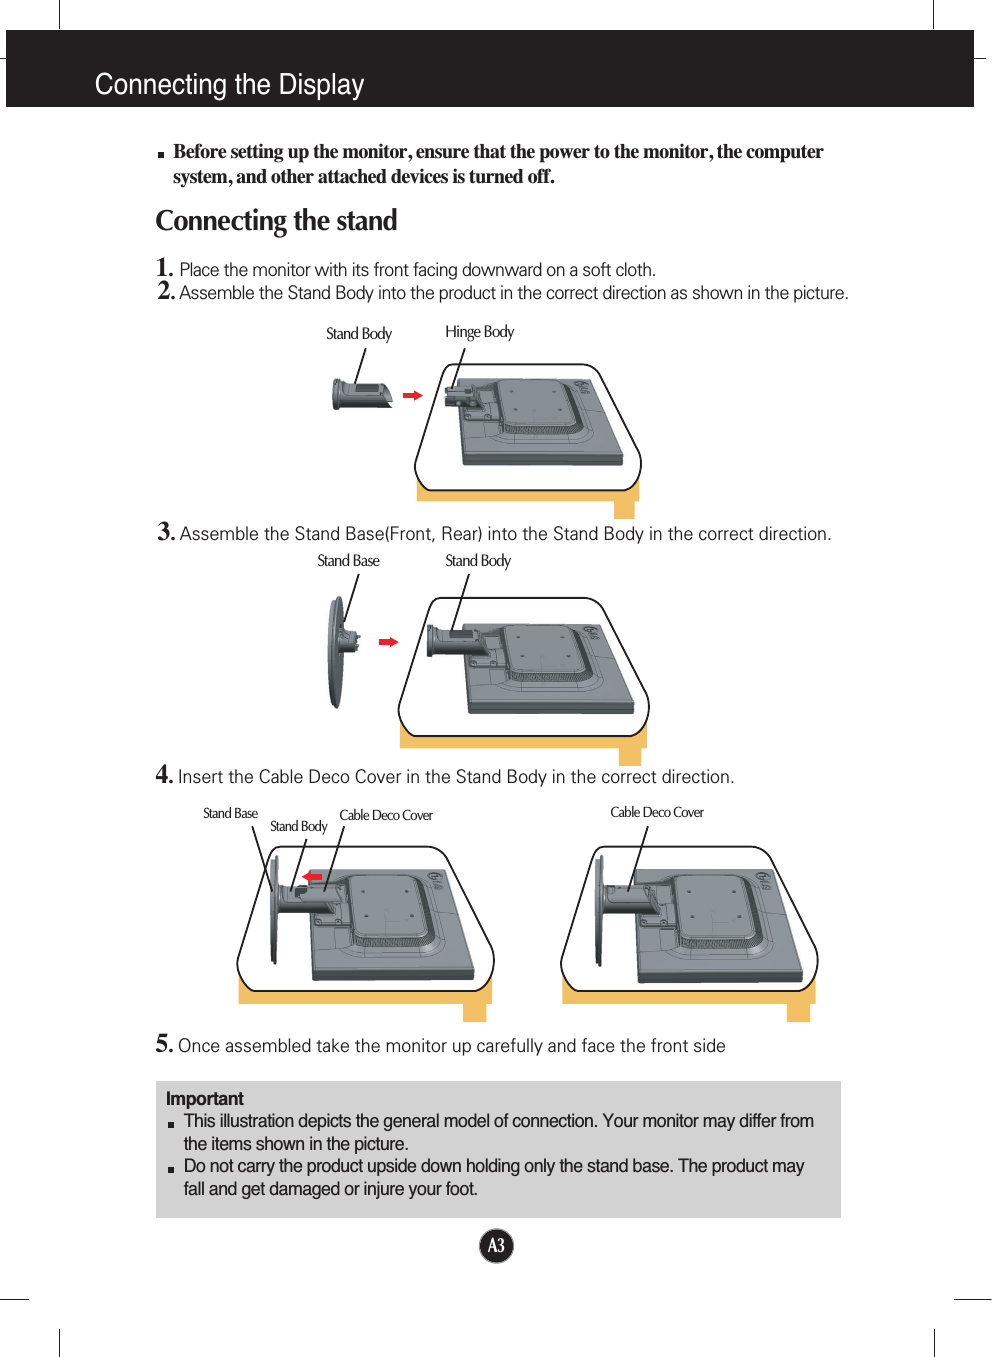 A3Connecting the DisplayImportantThis illustration depicts the general model of connection. Your monitor may differ fromthe items shown in the picture.Do not carry the product upside down holding only the stand base. The product mayfall and get damaged or injure your foot.Before setting up the monitor, ensure that the power to the monitor, the computersystem, and other attached devices is turned off.Connecting the stand 1.Place the monitor with its front facing downward on a soft cloth.2.Assemble the Stand Body into the product in the correct direction as shown in the picture. 3.Assemble the Stand Base(Front, Rear) into the Stand Body in the correct direction.Stand BodyStand BaseStand Body Hinge Body5.Once assembled take the monitor up carefully and face the front side4.Insert the Cable Deco Cover in the Stand Body in the correct direction.Stand BodyStand Base Cable Deco Cover Cable Deco Cover